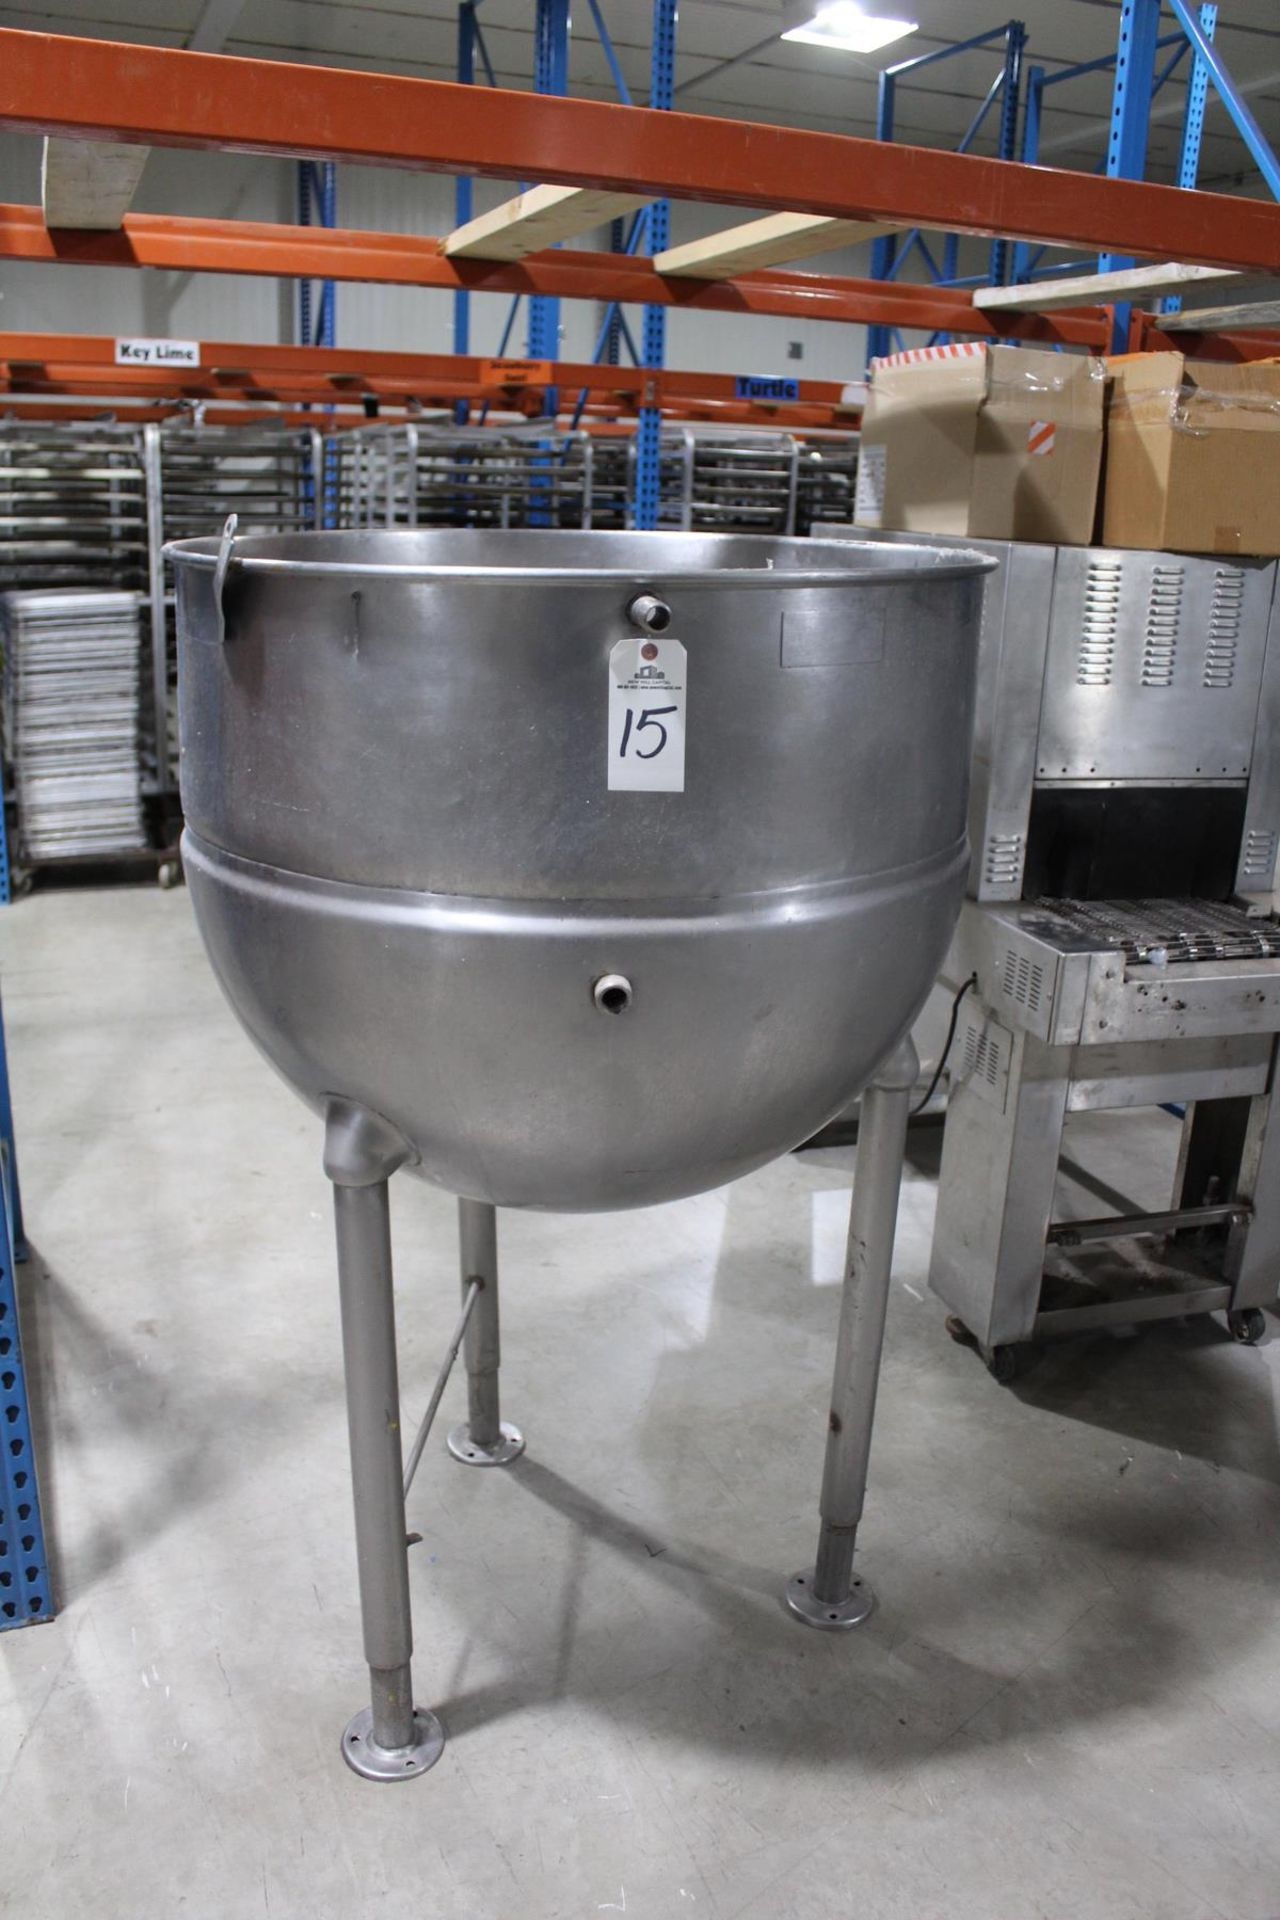 36" X 30" Deep Jacketed Kettle, M# FT-100 SP | Rig Fee: $125